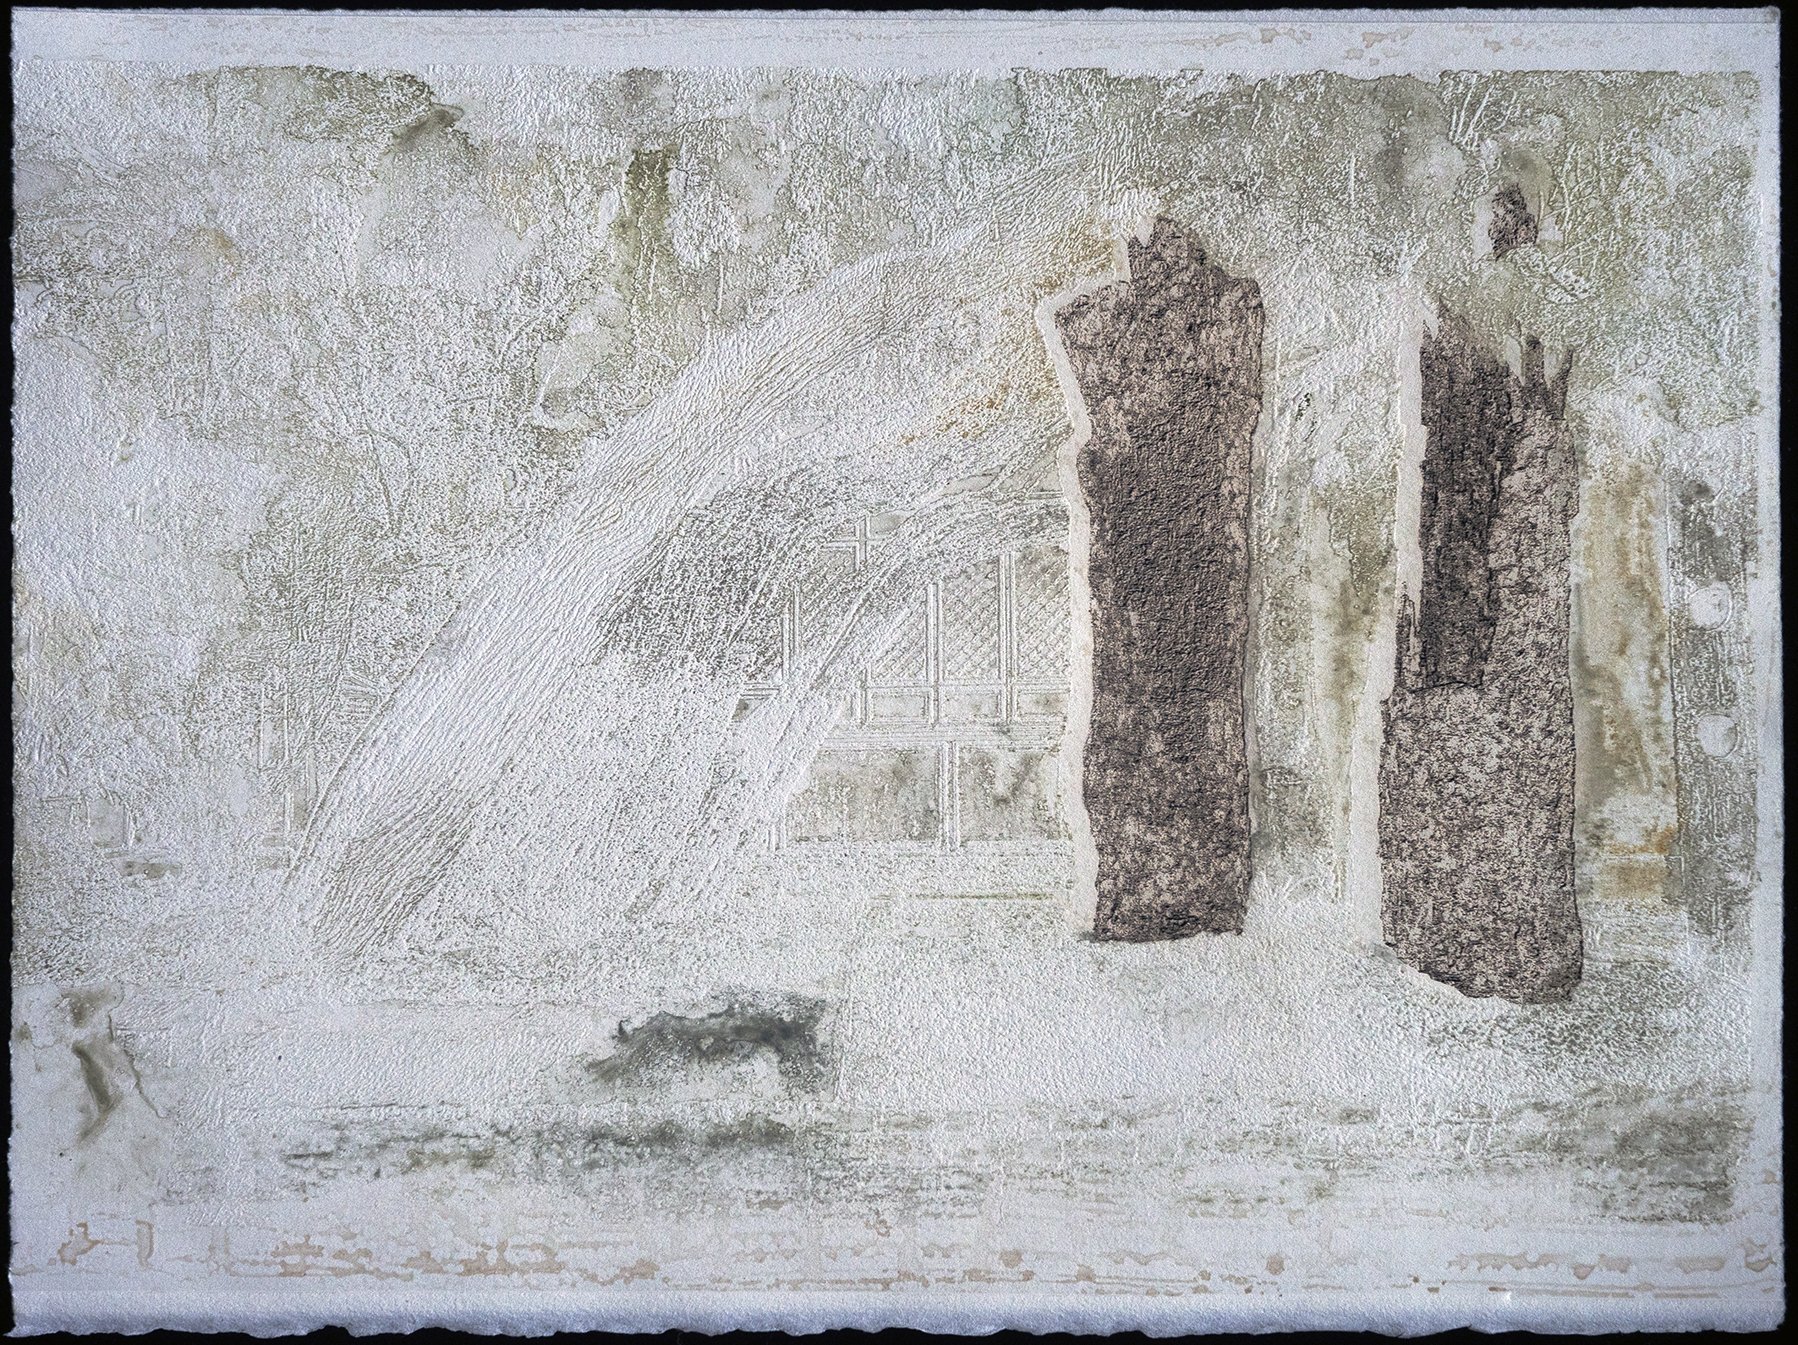   Untitled  (Chinese Willow), 2020   Watercolor monoprint with laser engraving 